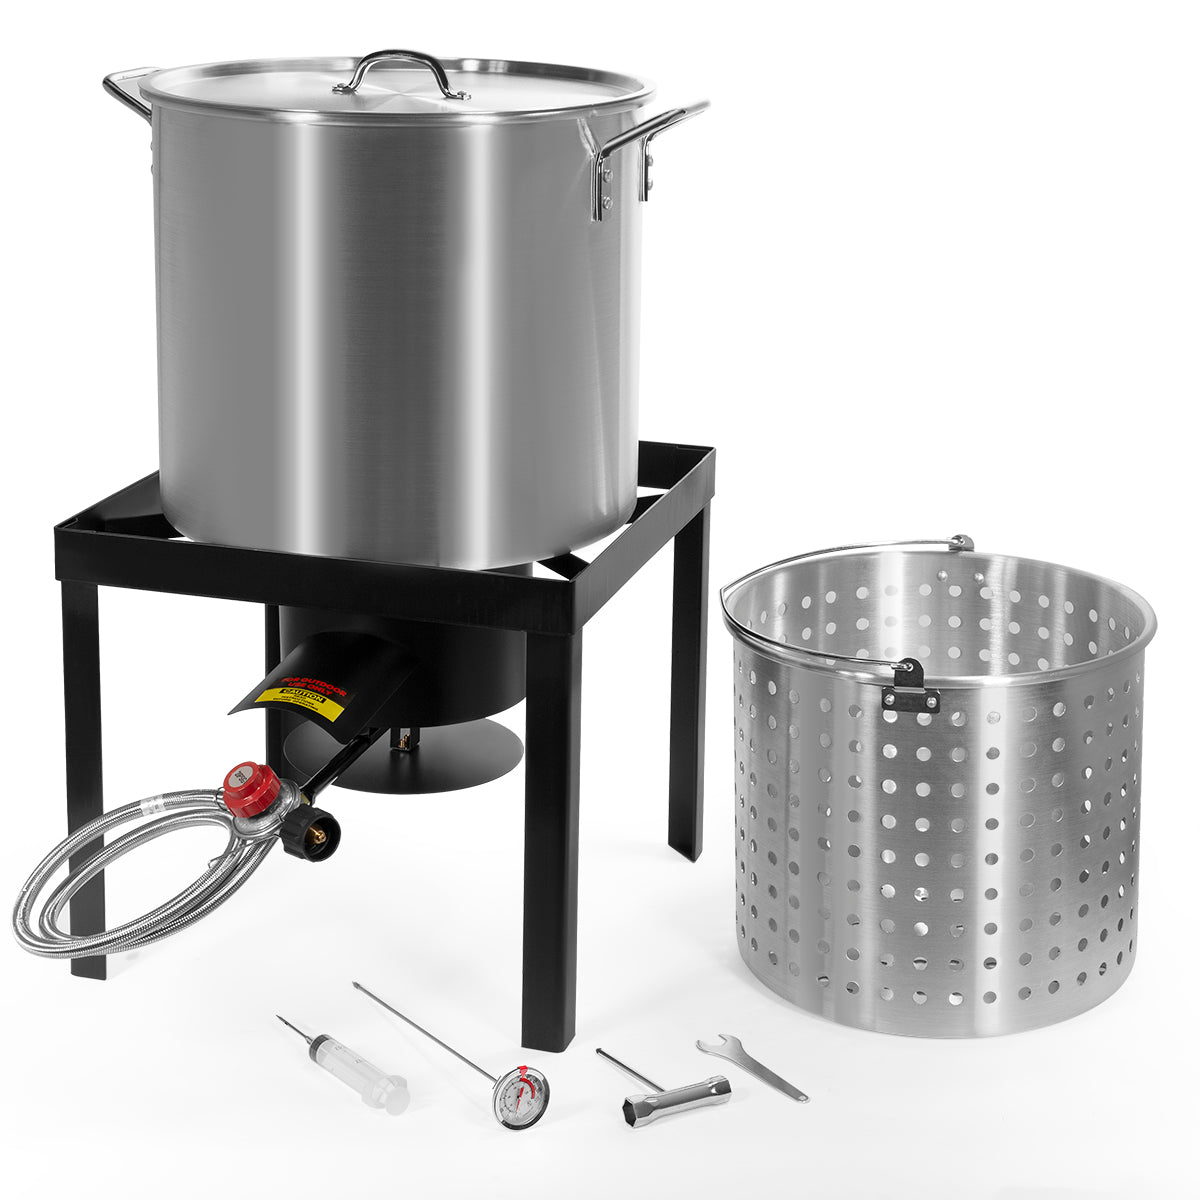 Barton 21 qt. Stainless Steel Stock Pot with Strainer Basket and Lid